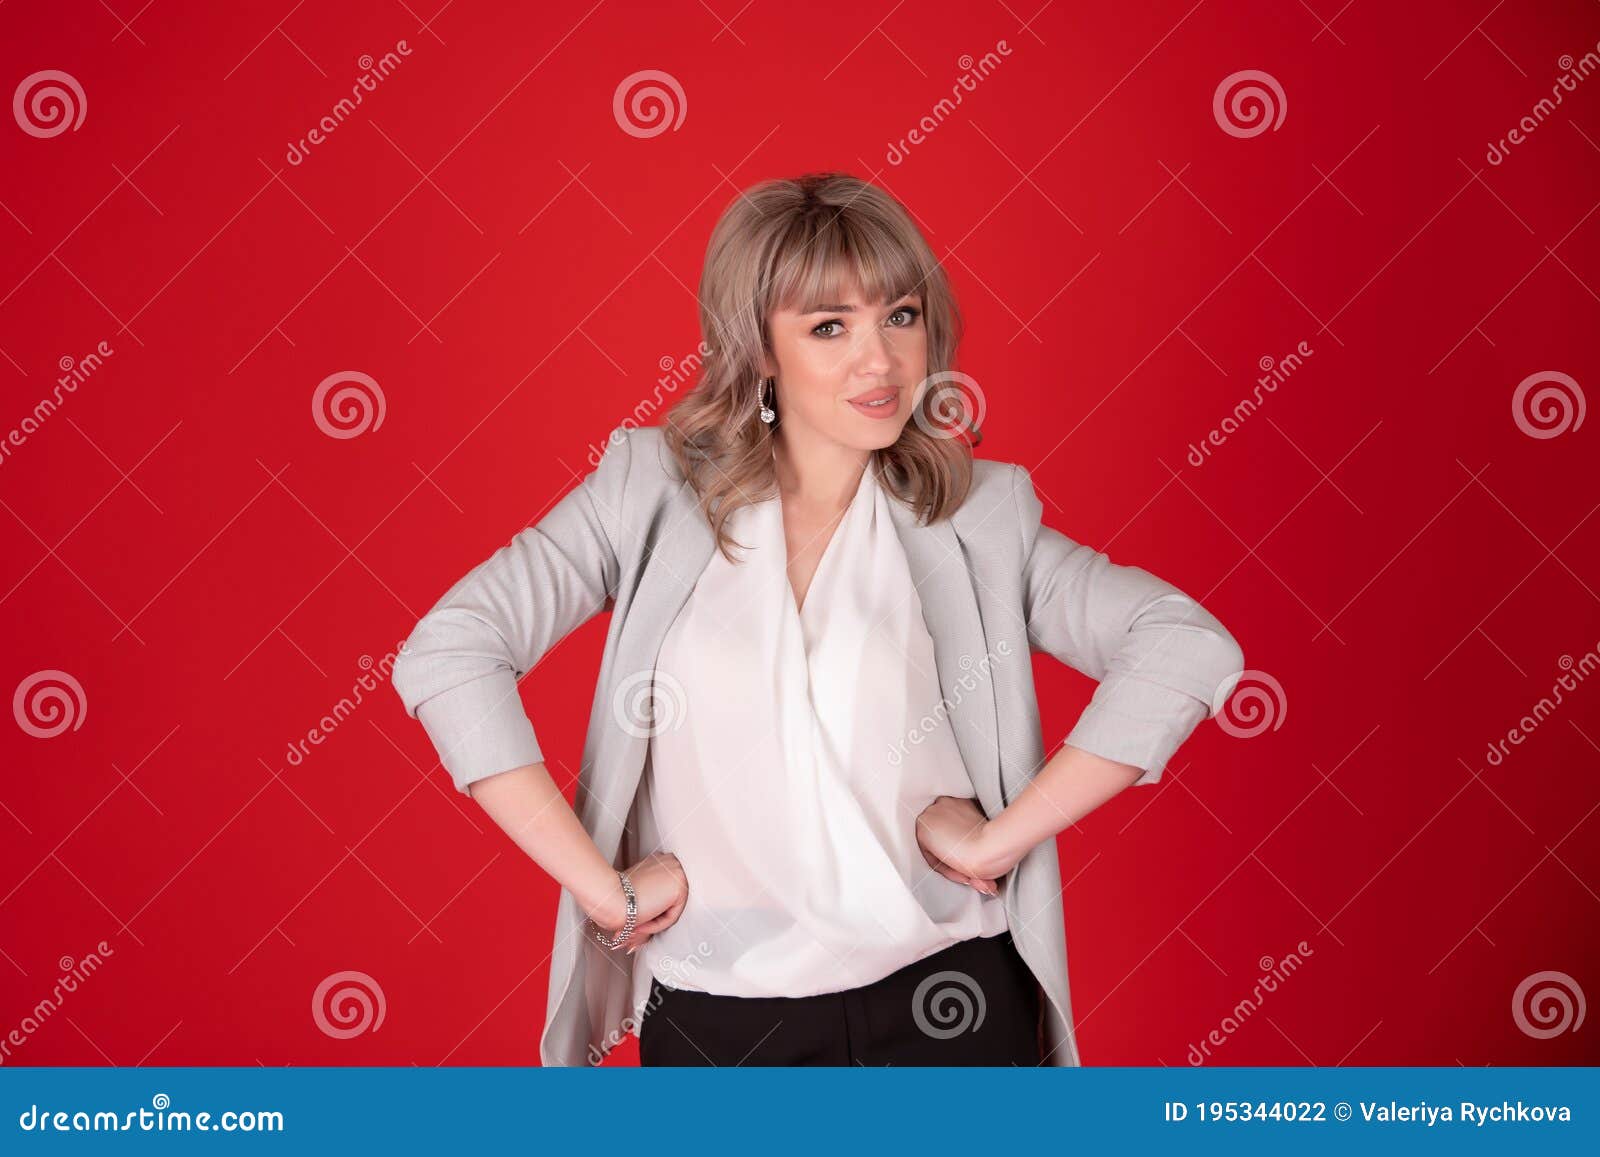 portrait of a woman business blonde in bright jacket on redbackground